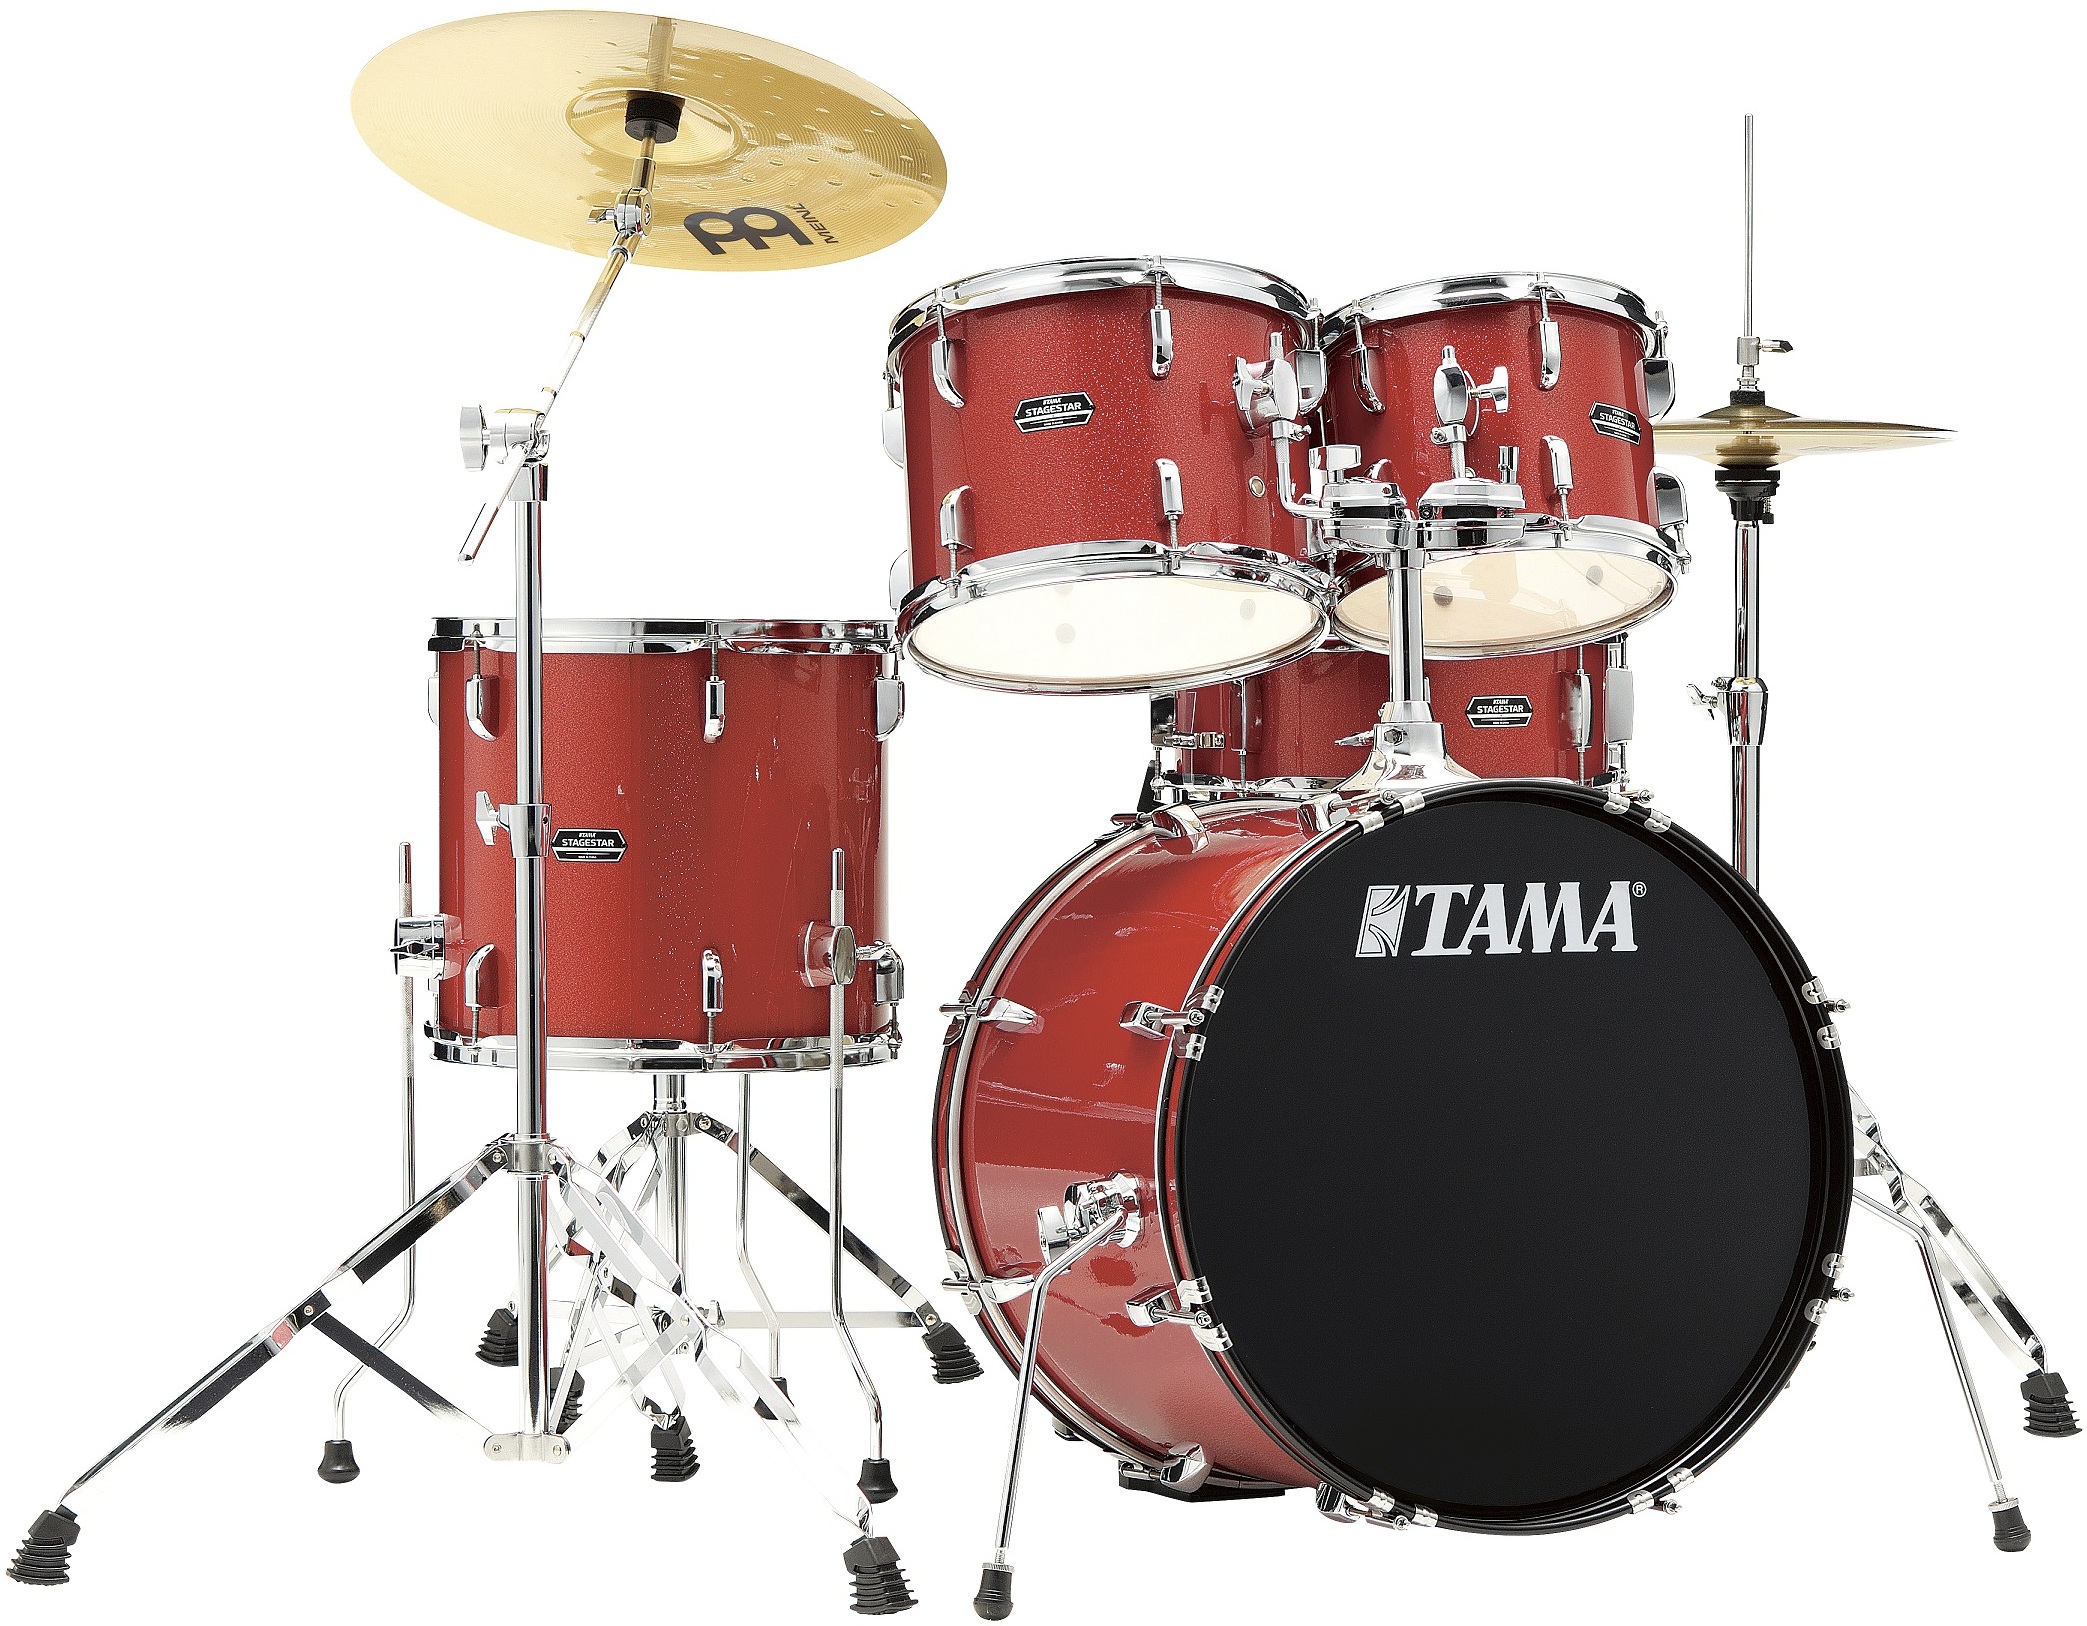 Tama Stagestar St50h5 20 Poplar Kit - Candy Red Sparkle - Strage drum-kit - Main picture